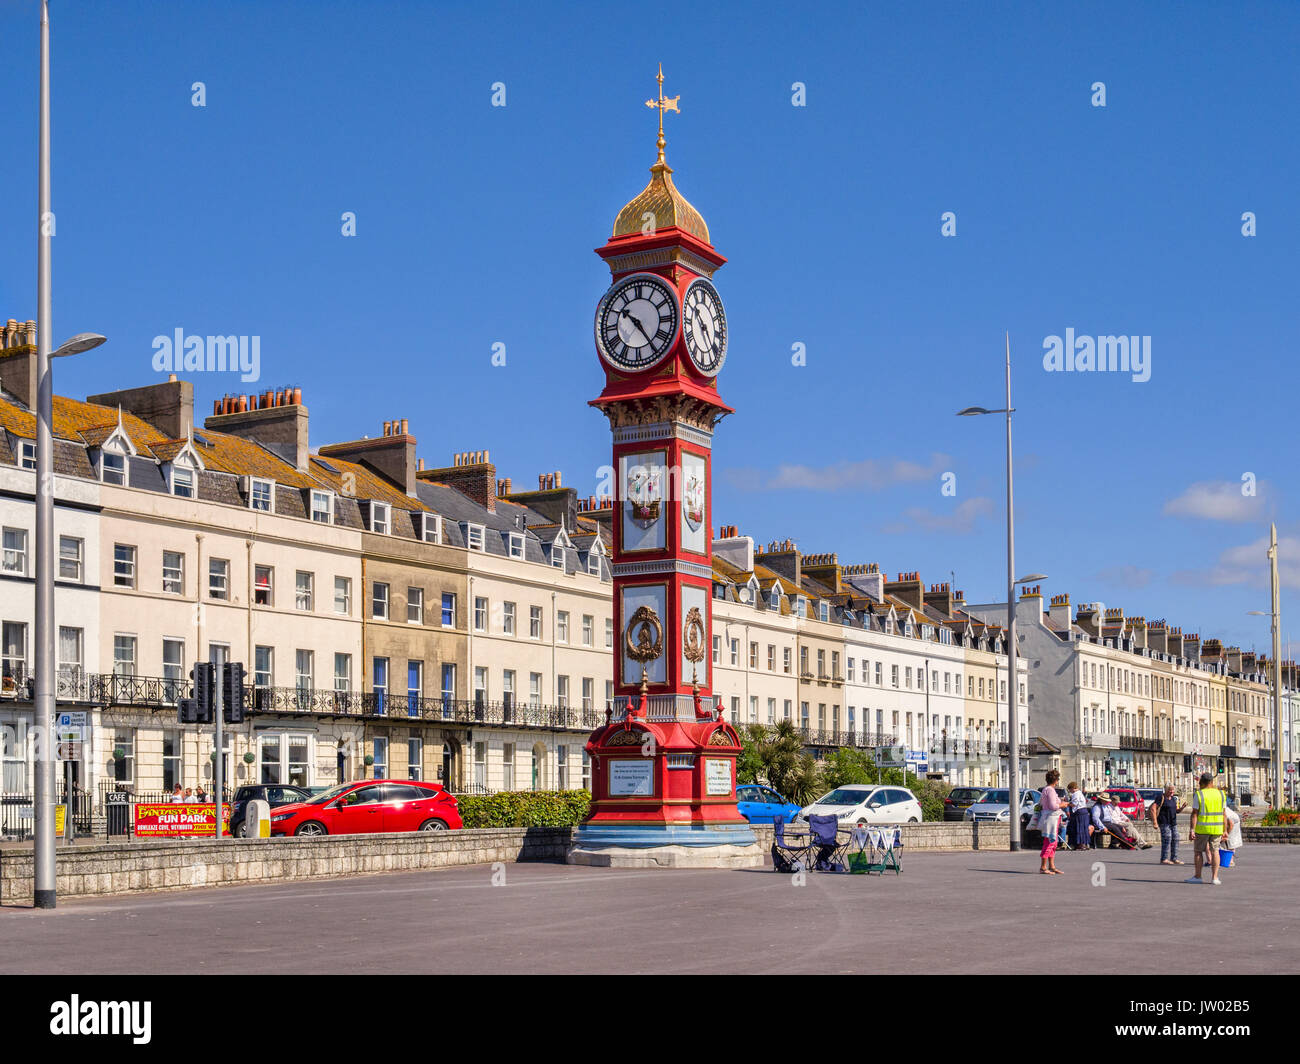 2 July 2017: Weymouth, Dorset, England, UK - The Jubilee Clock Tower on Weymouth Promenade on a beautiful sunny day with clear blue sky. Stock Photo